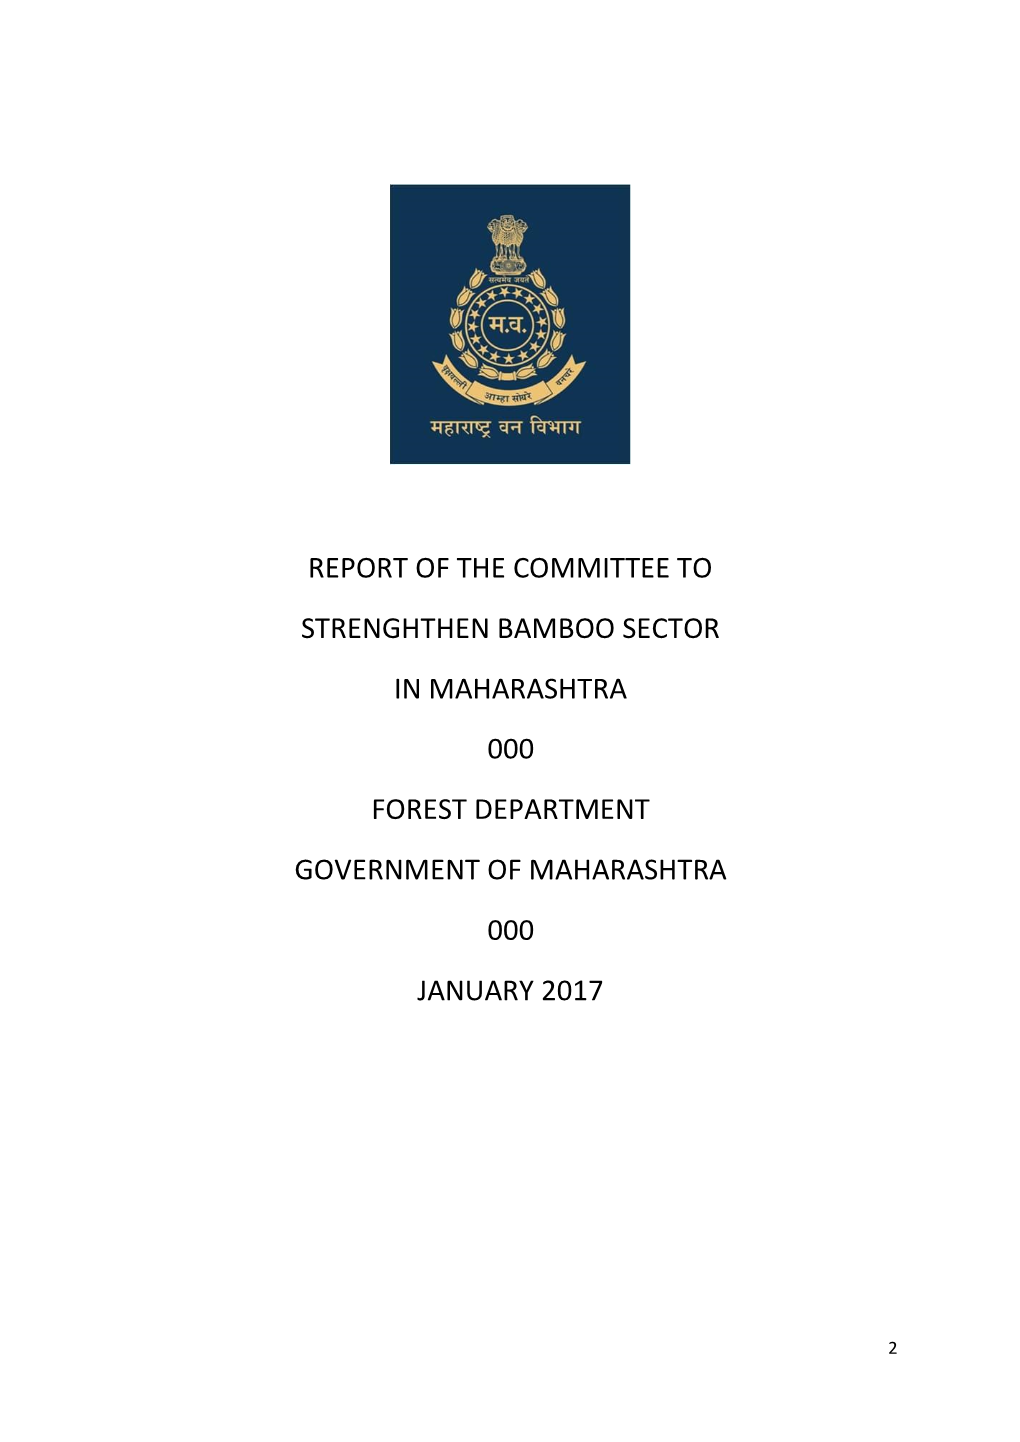 Report of the Committee to Strenghthen Bamboo Sector in Maharashtra 000 Forest Department Government of Maharashtra 000 January 2017